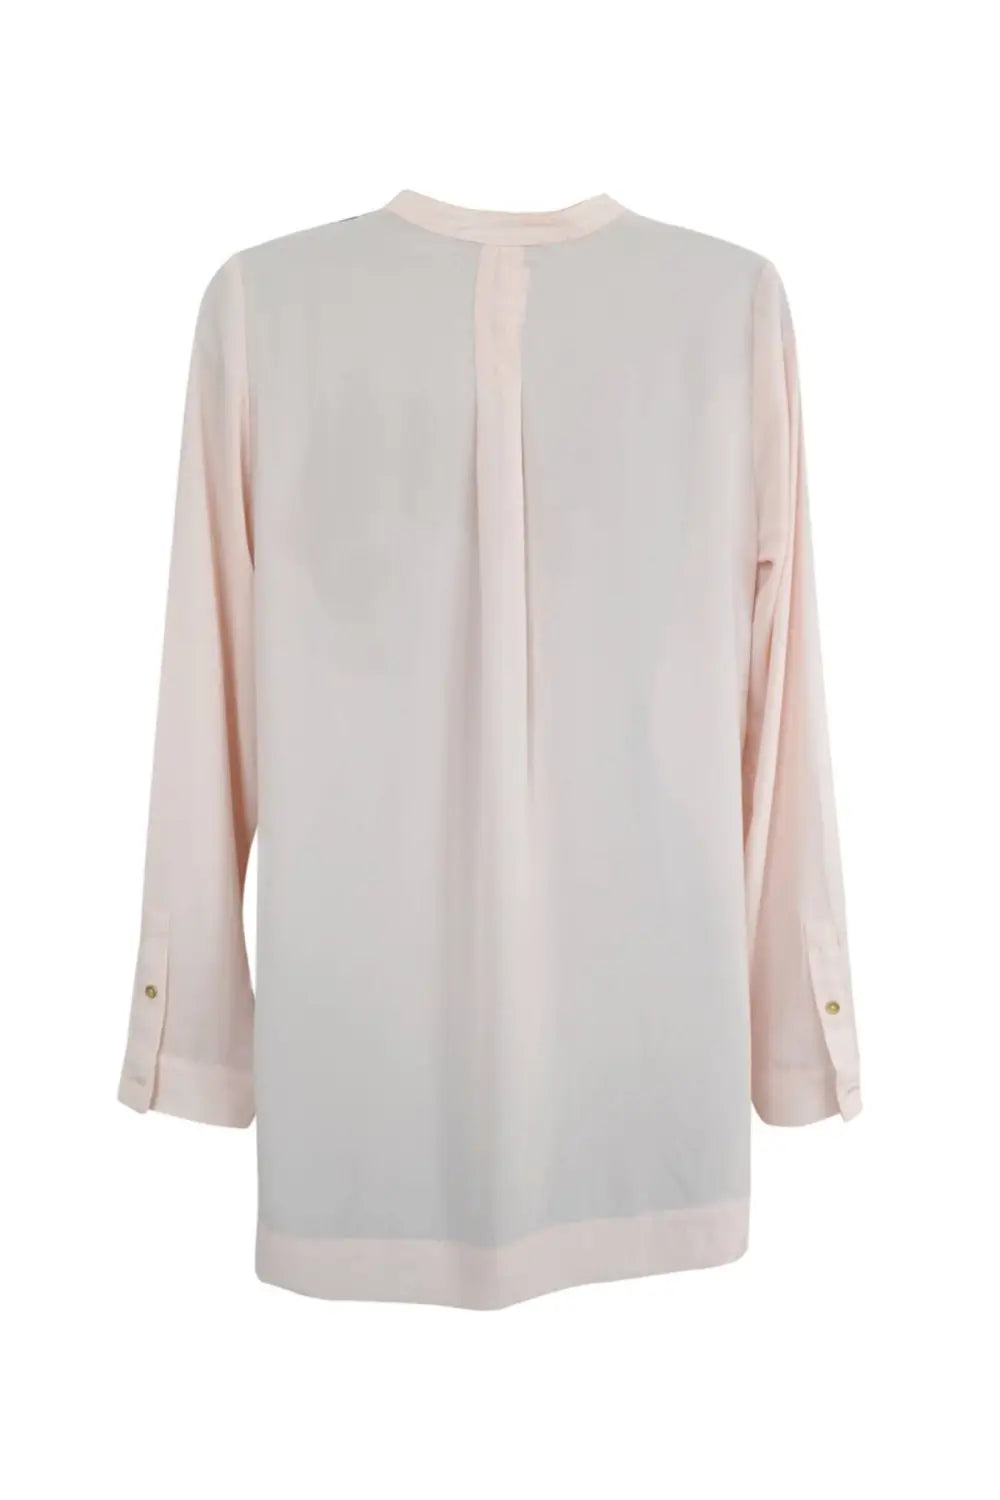 M&S Silky Tunic Blouse